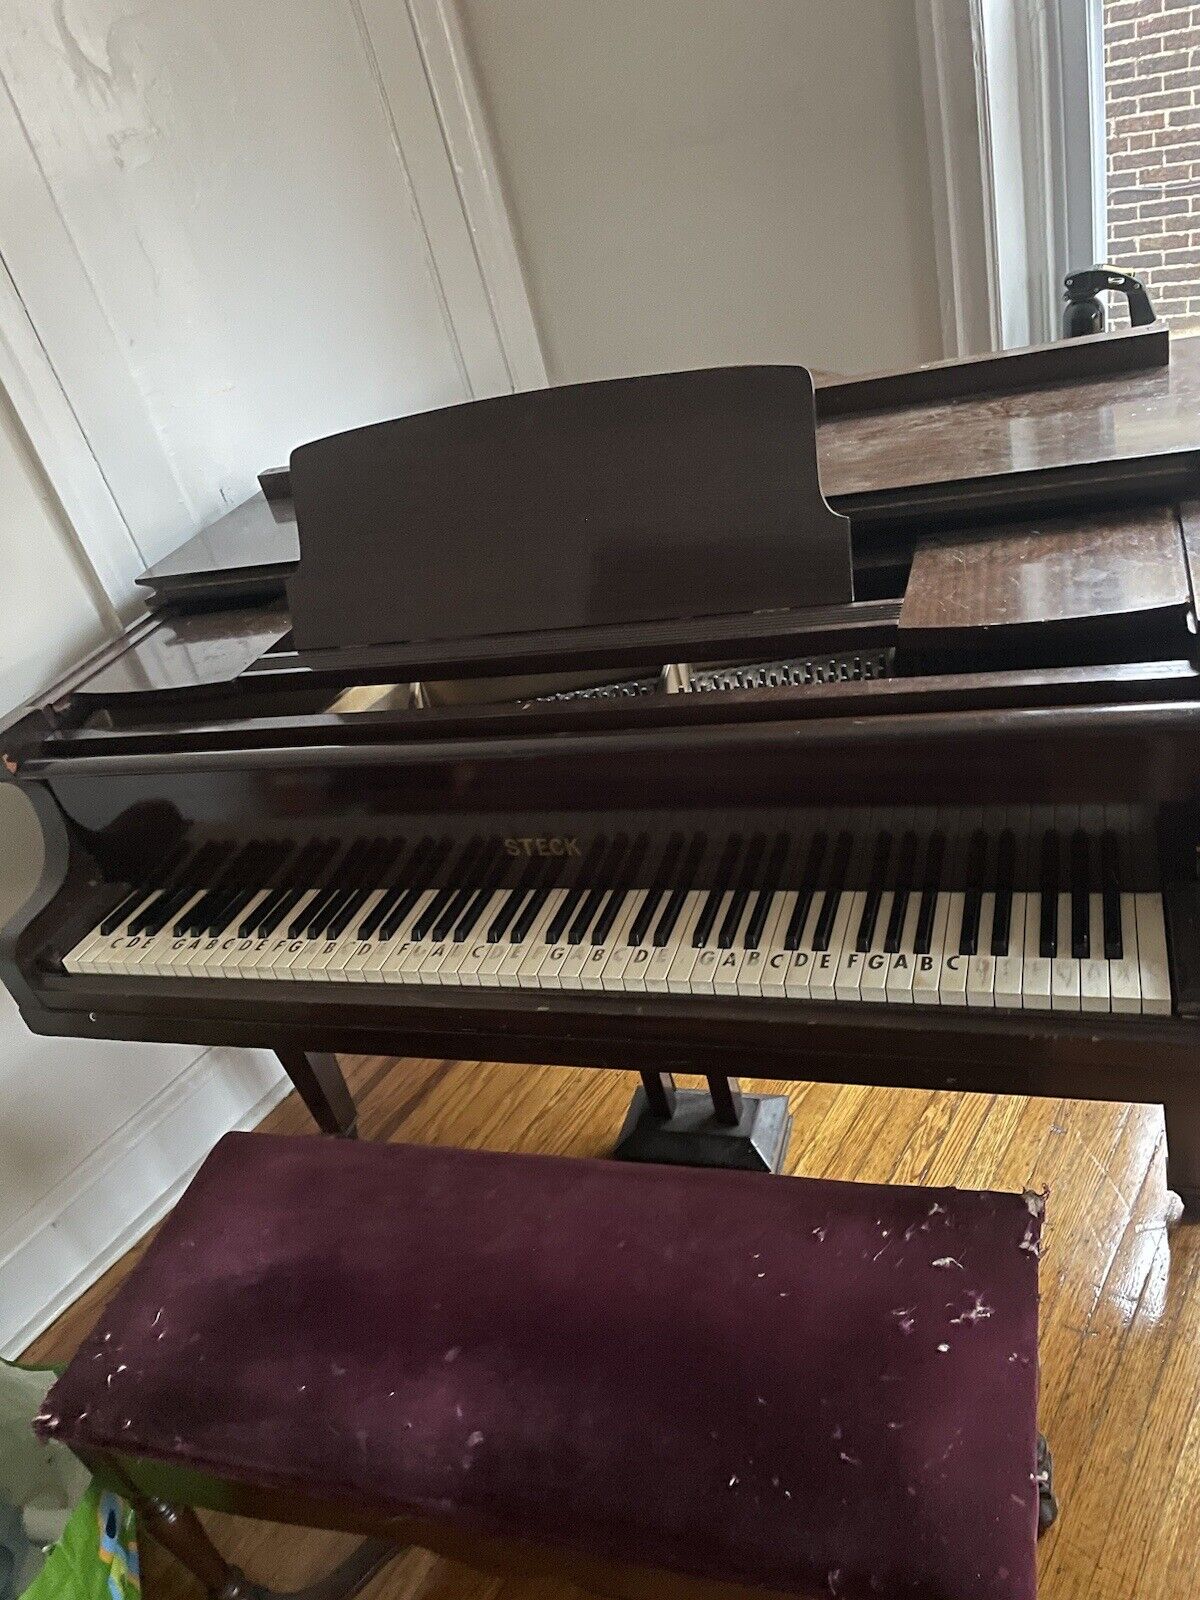 60+ Years Old Steck Piano